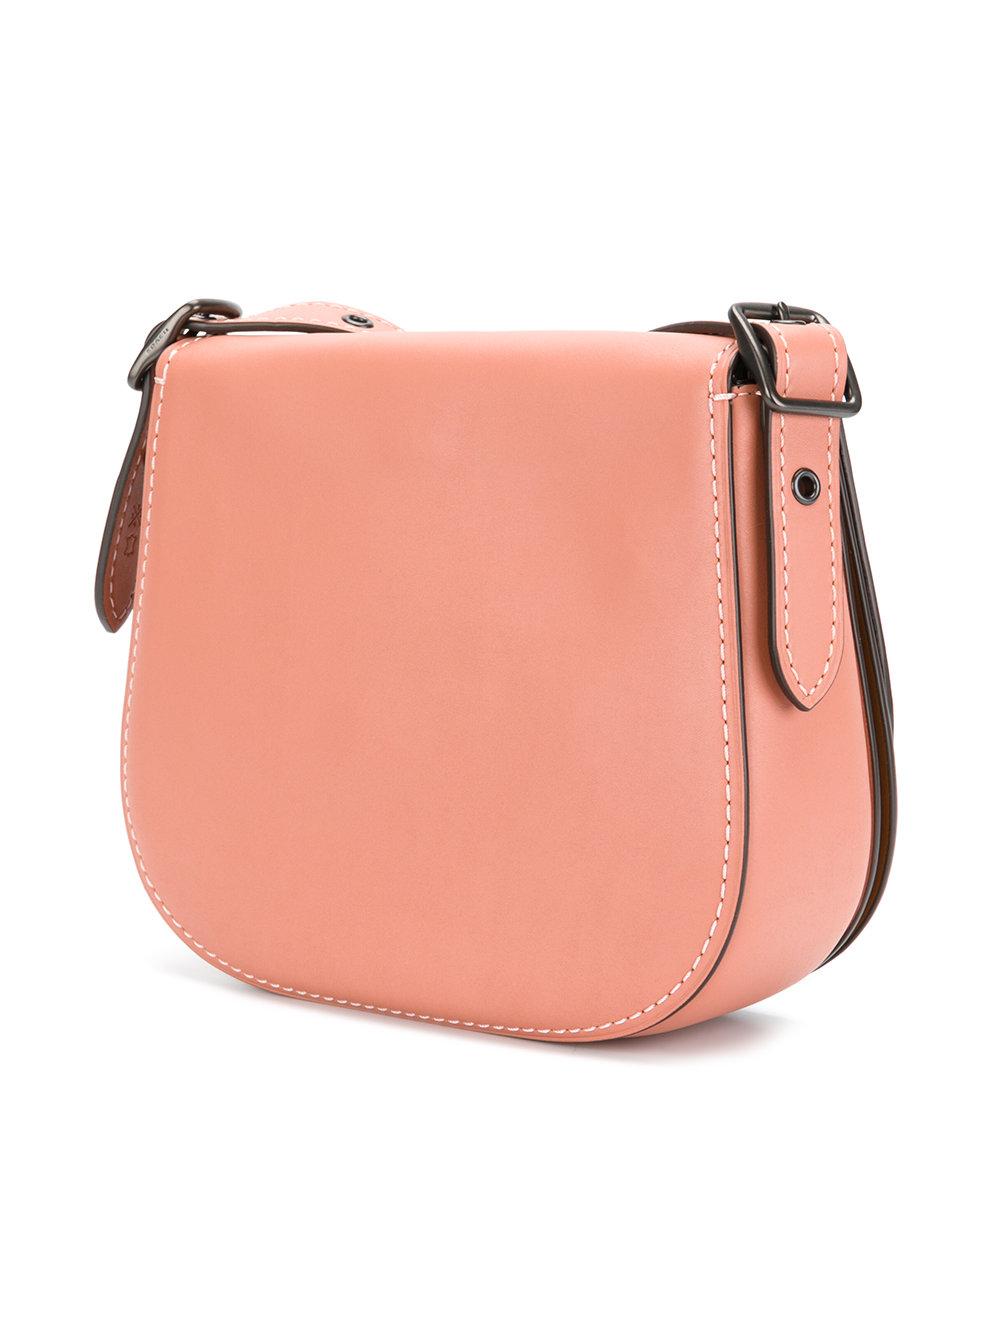 Lyst - Coach Linked Strap Saddle Bag in Pink